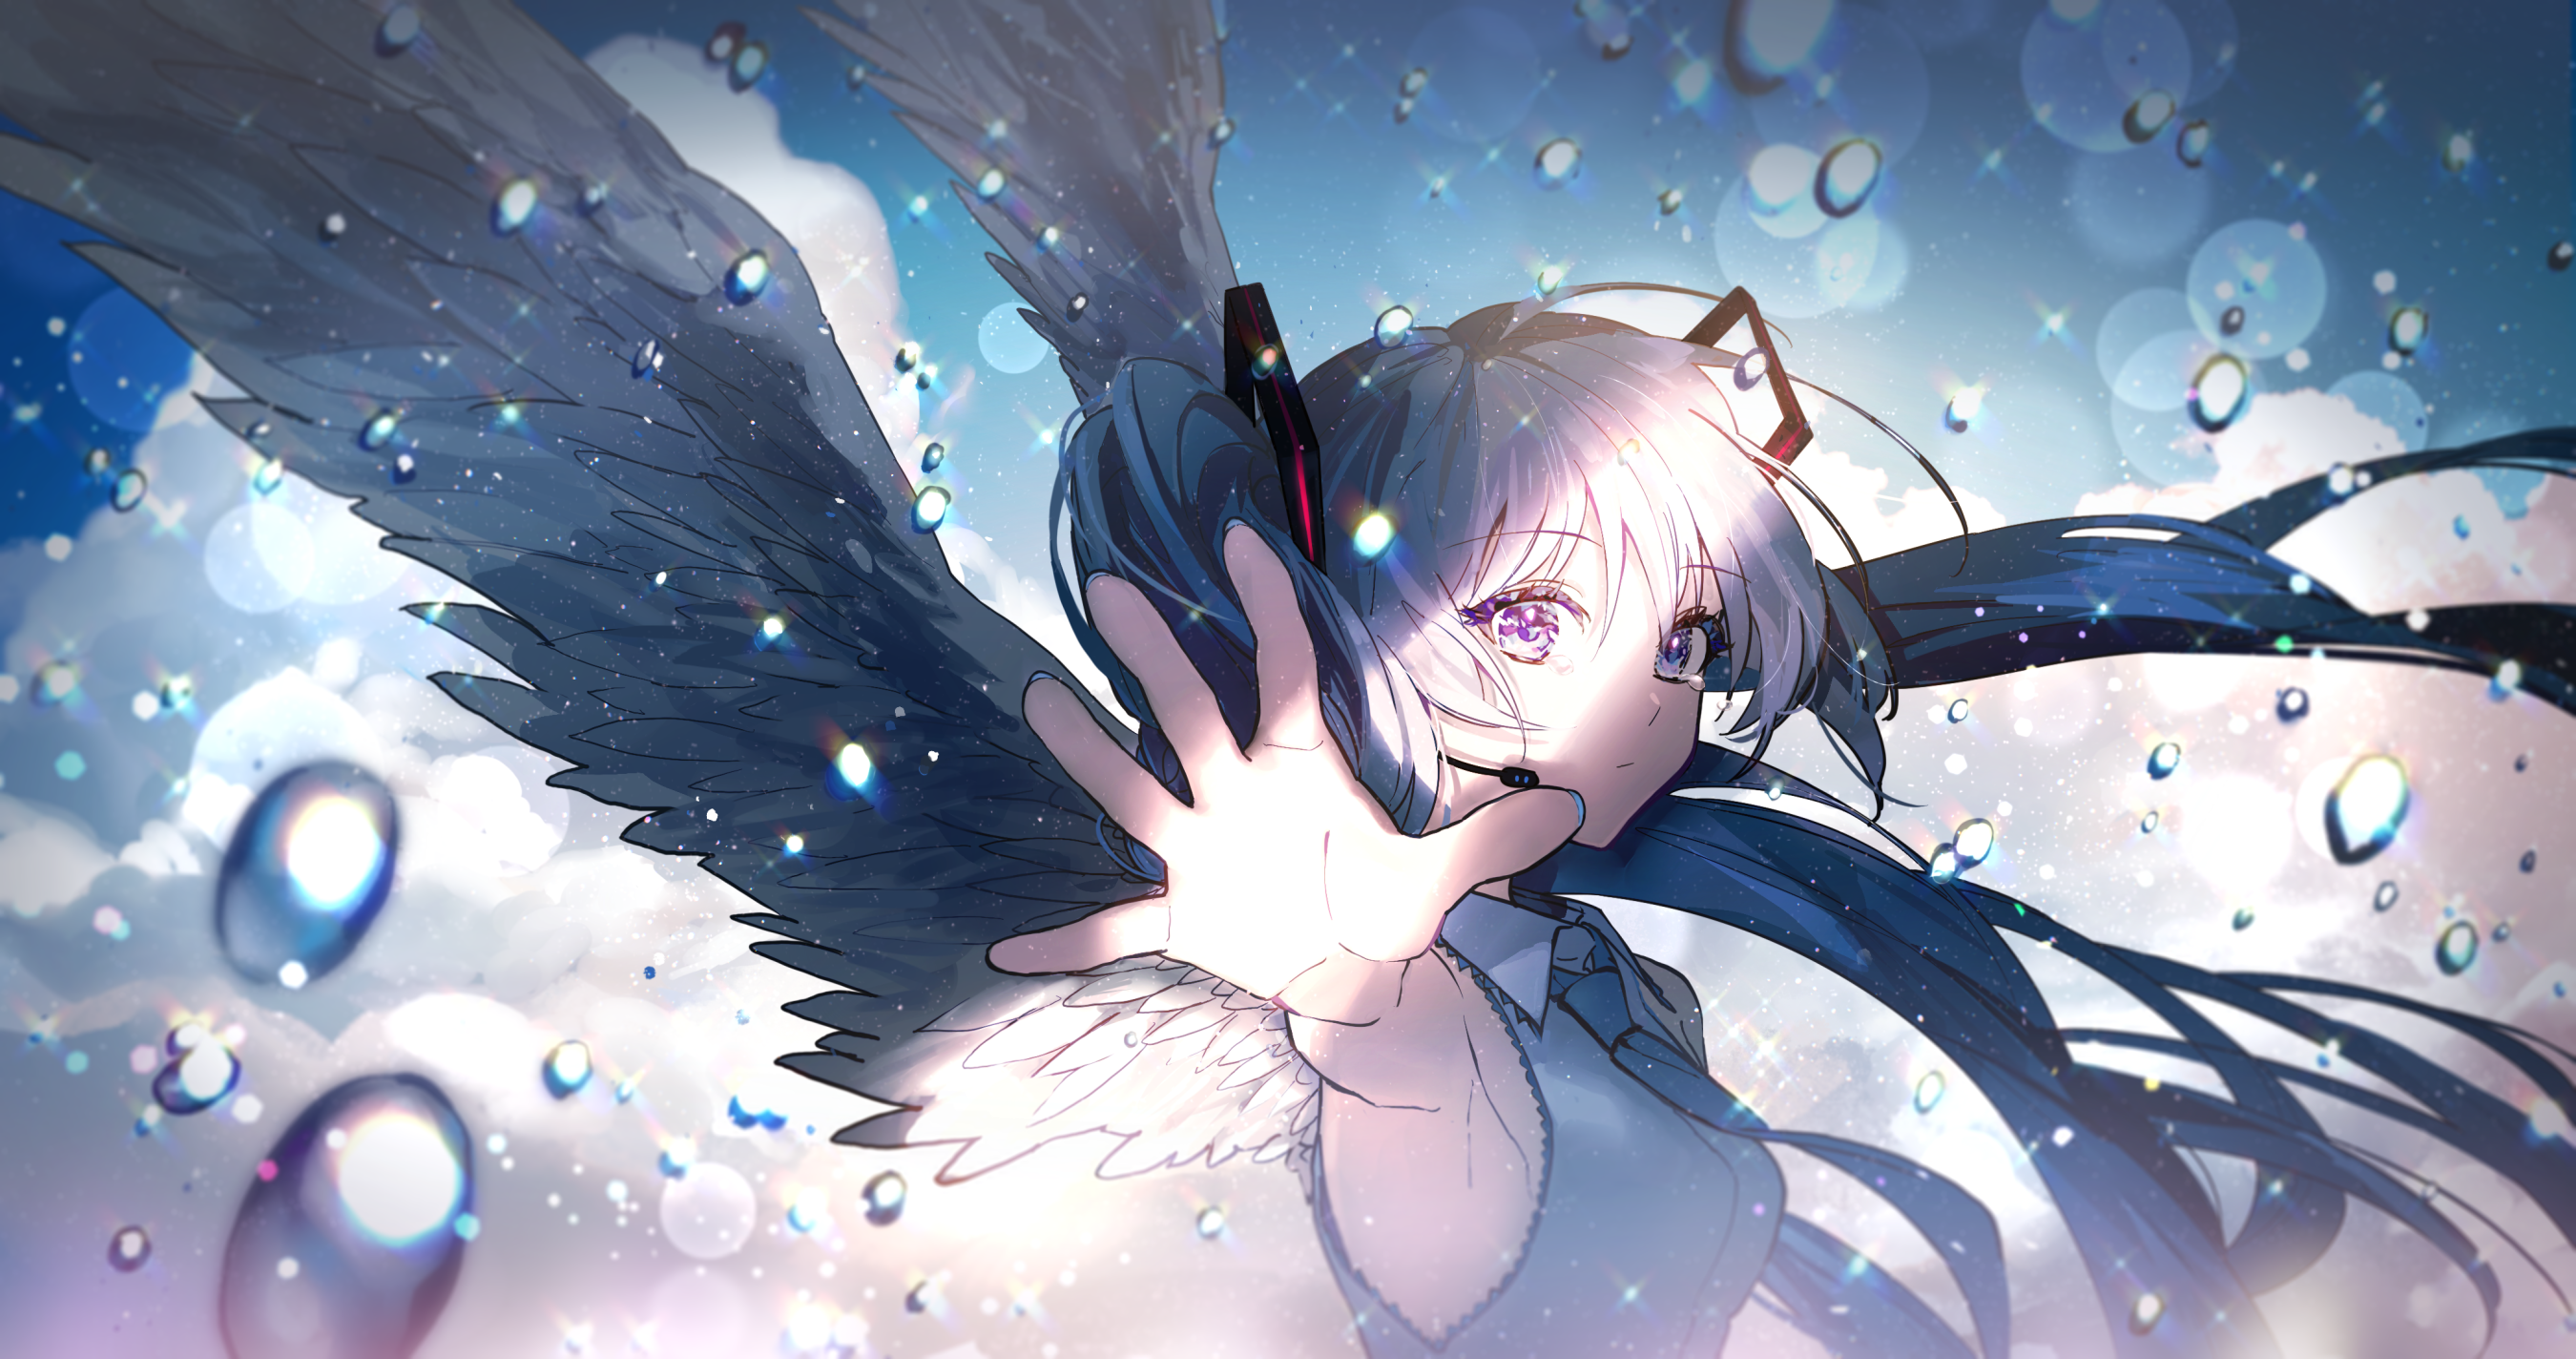 Anime 2700x1424 Hatsune Miku anime Vocaloid anime girls wings water drops looking at viewer twintails long hair arms reaching blue hair blue eyes